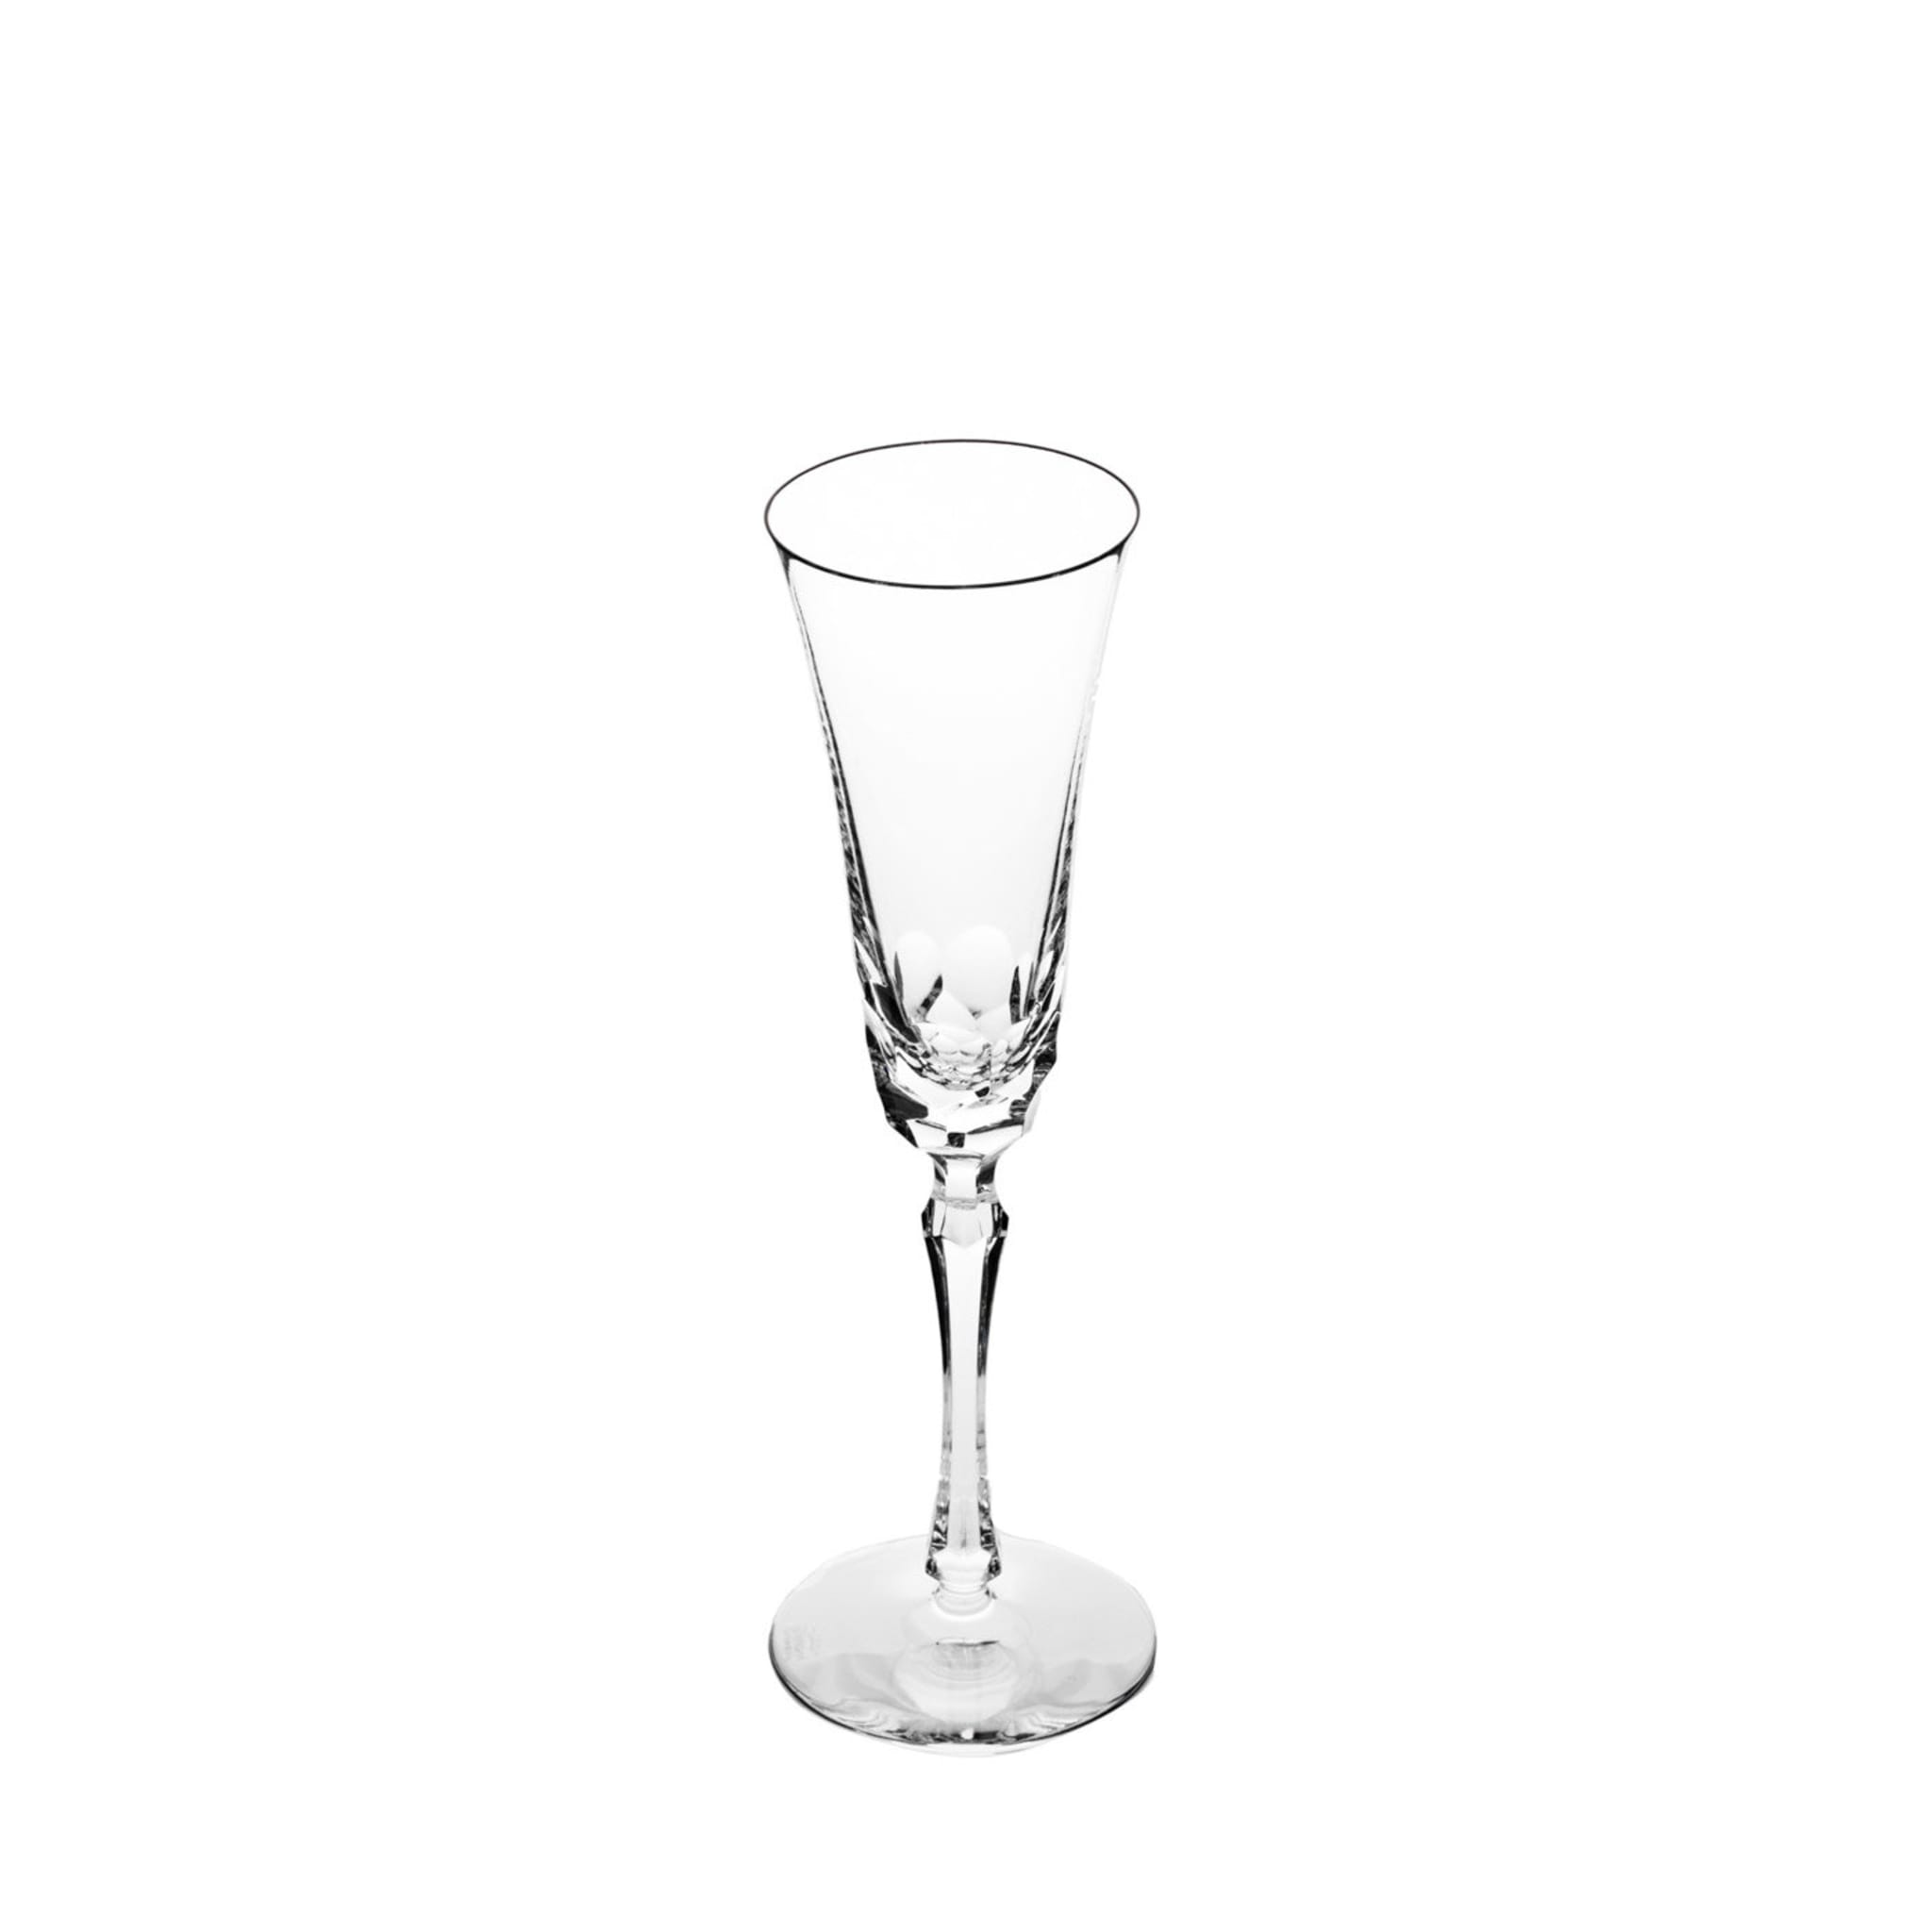 Set of 6 Narciso Crystal Flutes - Alternative view 1